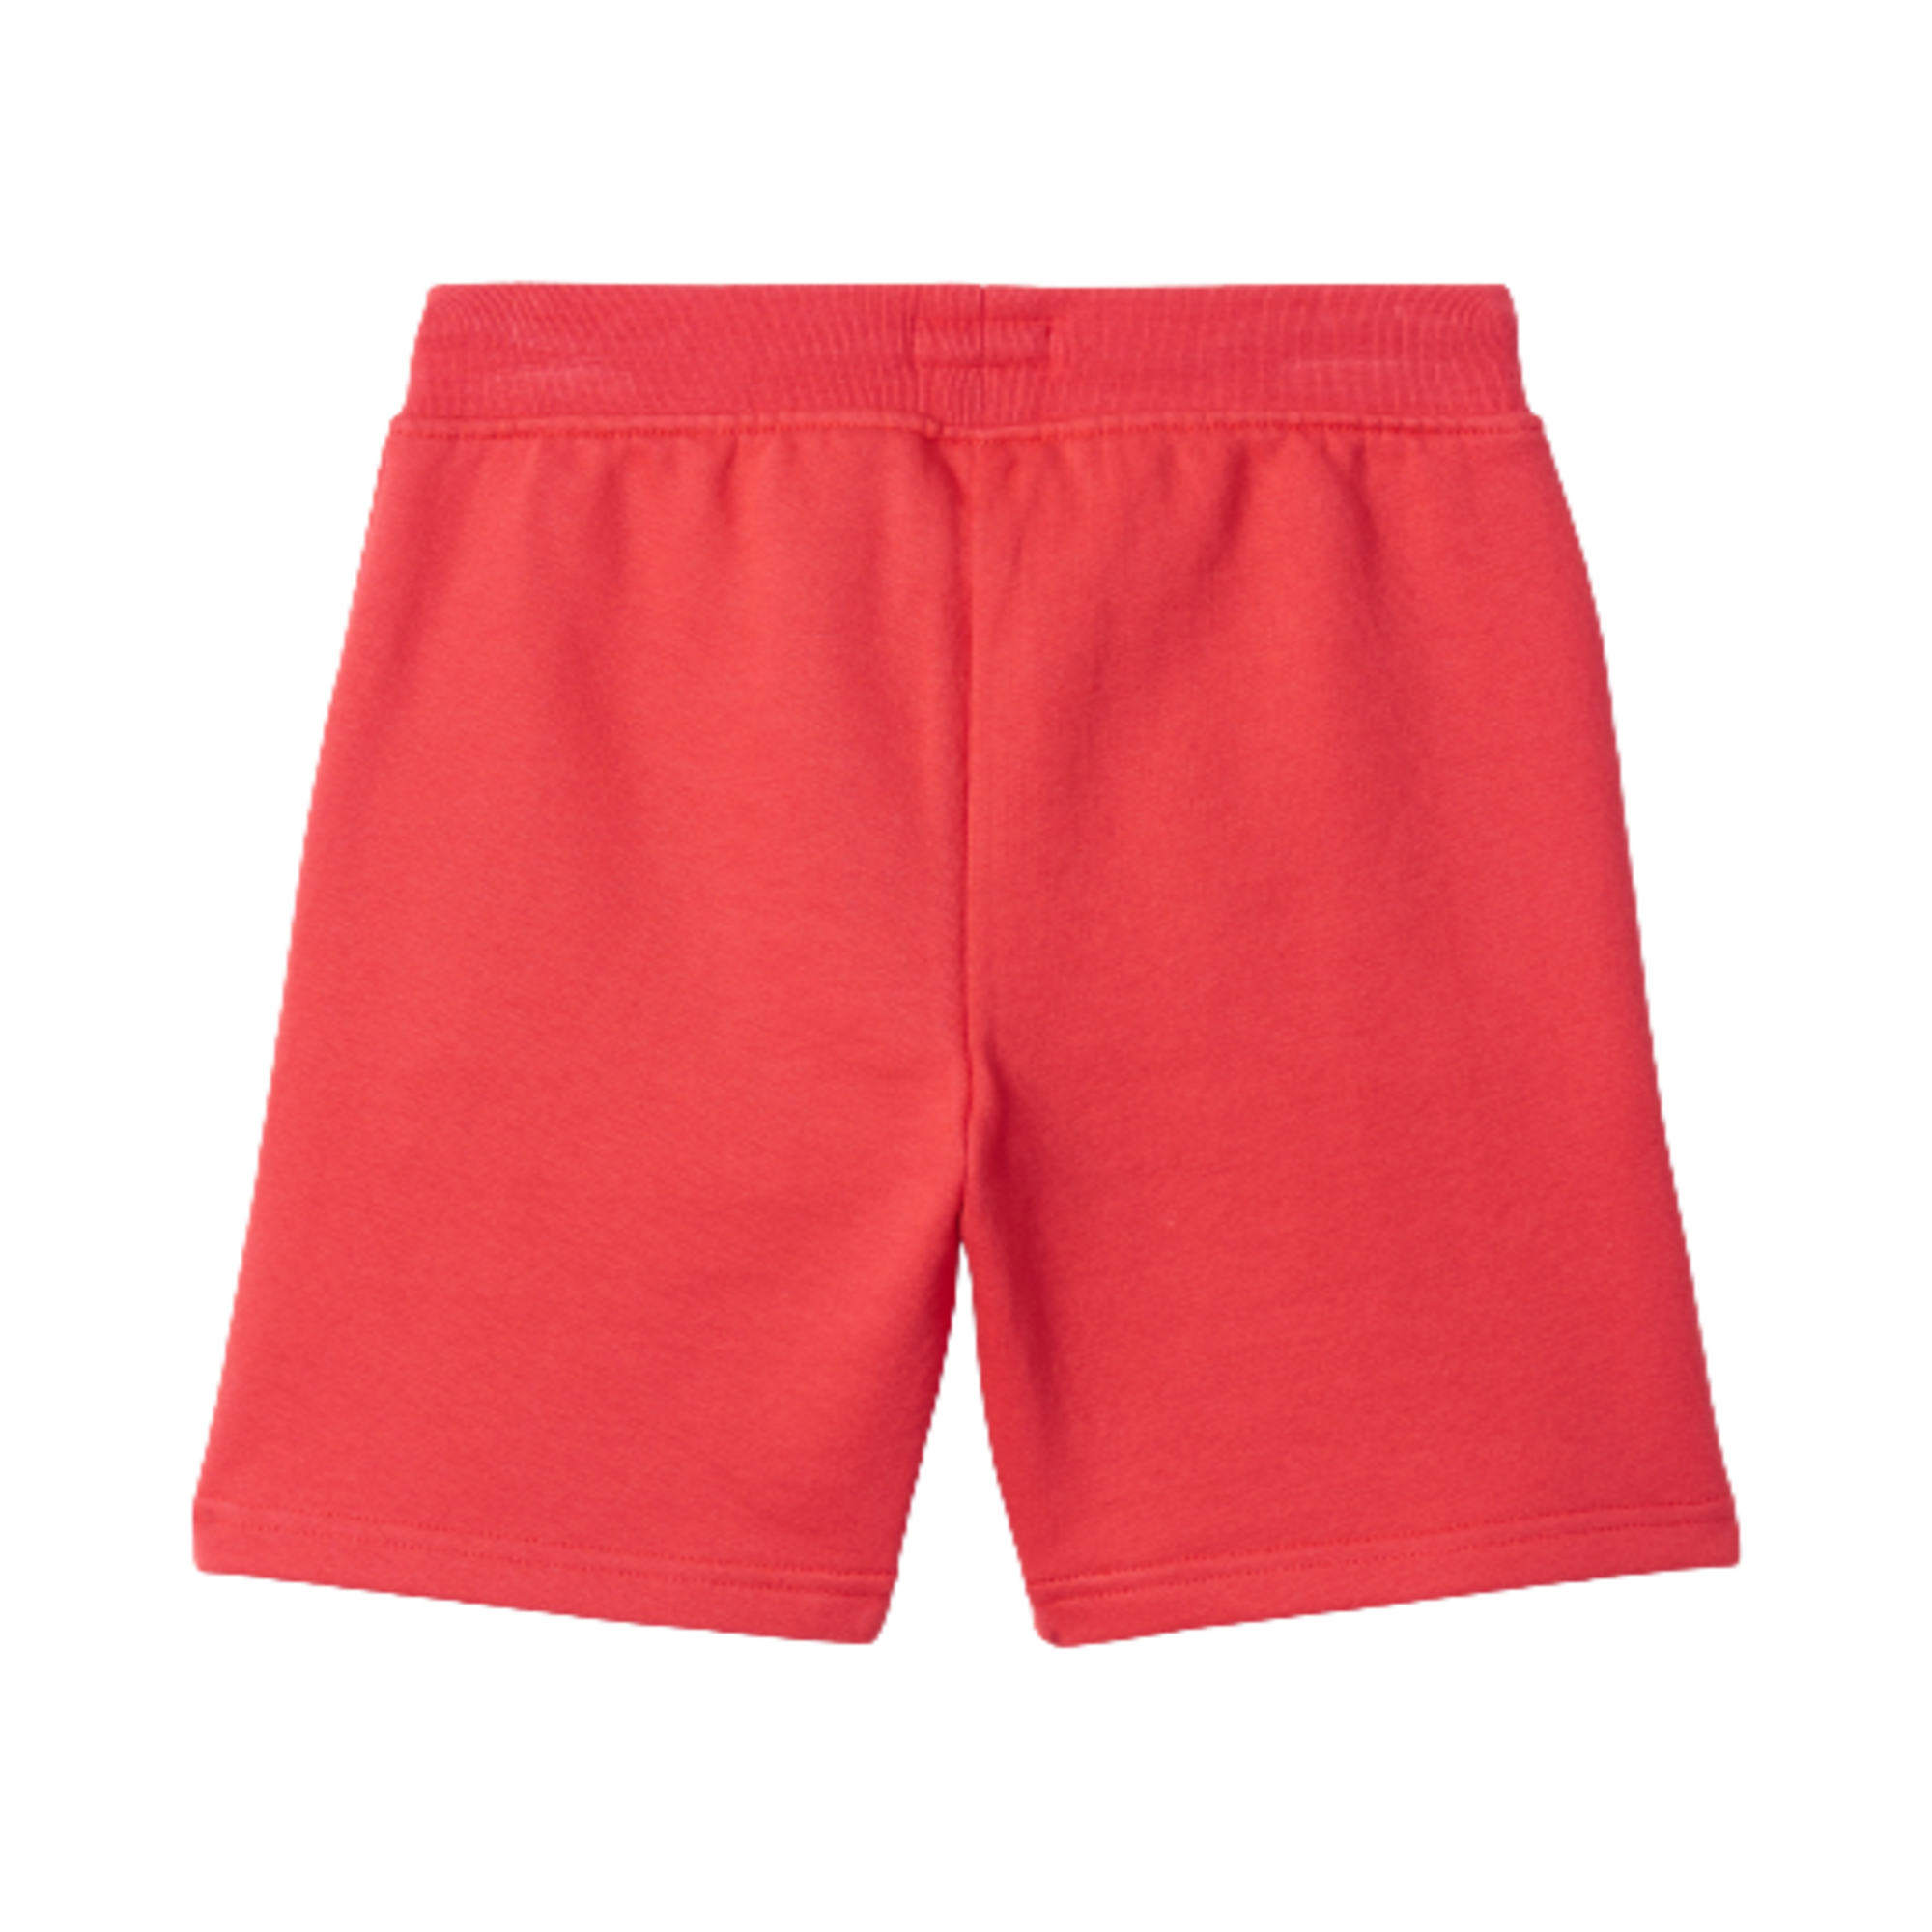 Hatley Nautical Red Terry Shorts - Chysanthemum